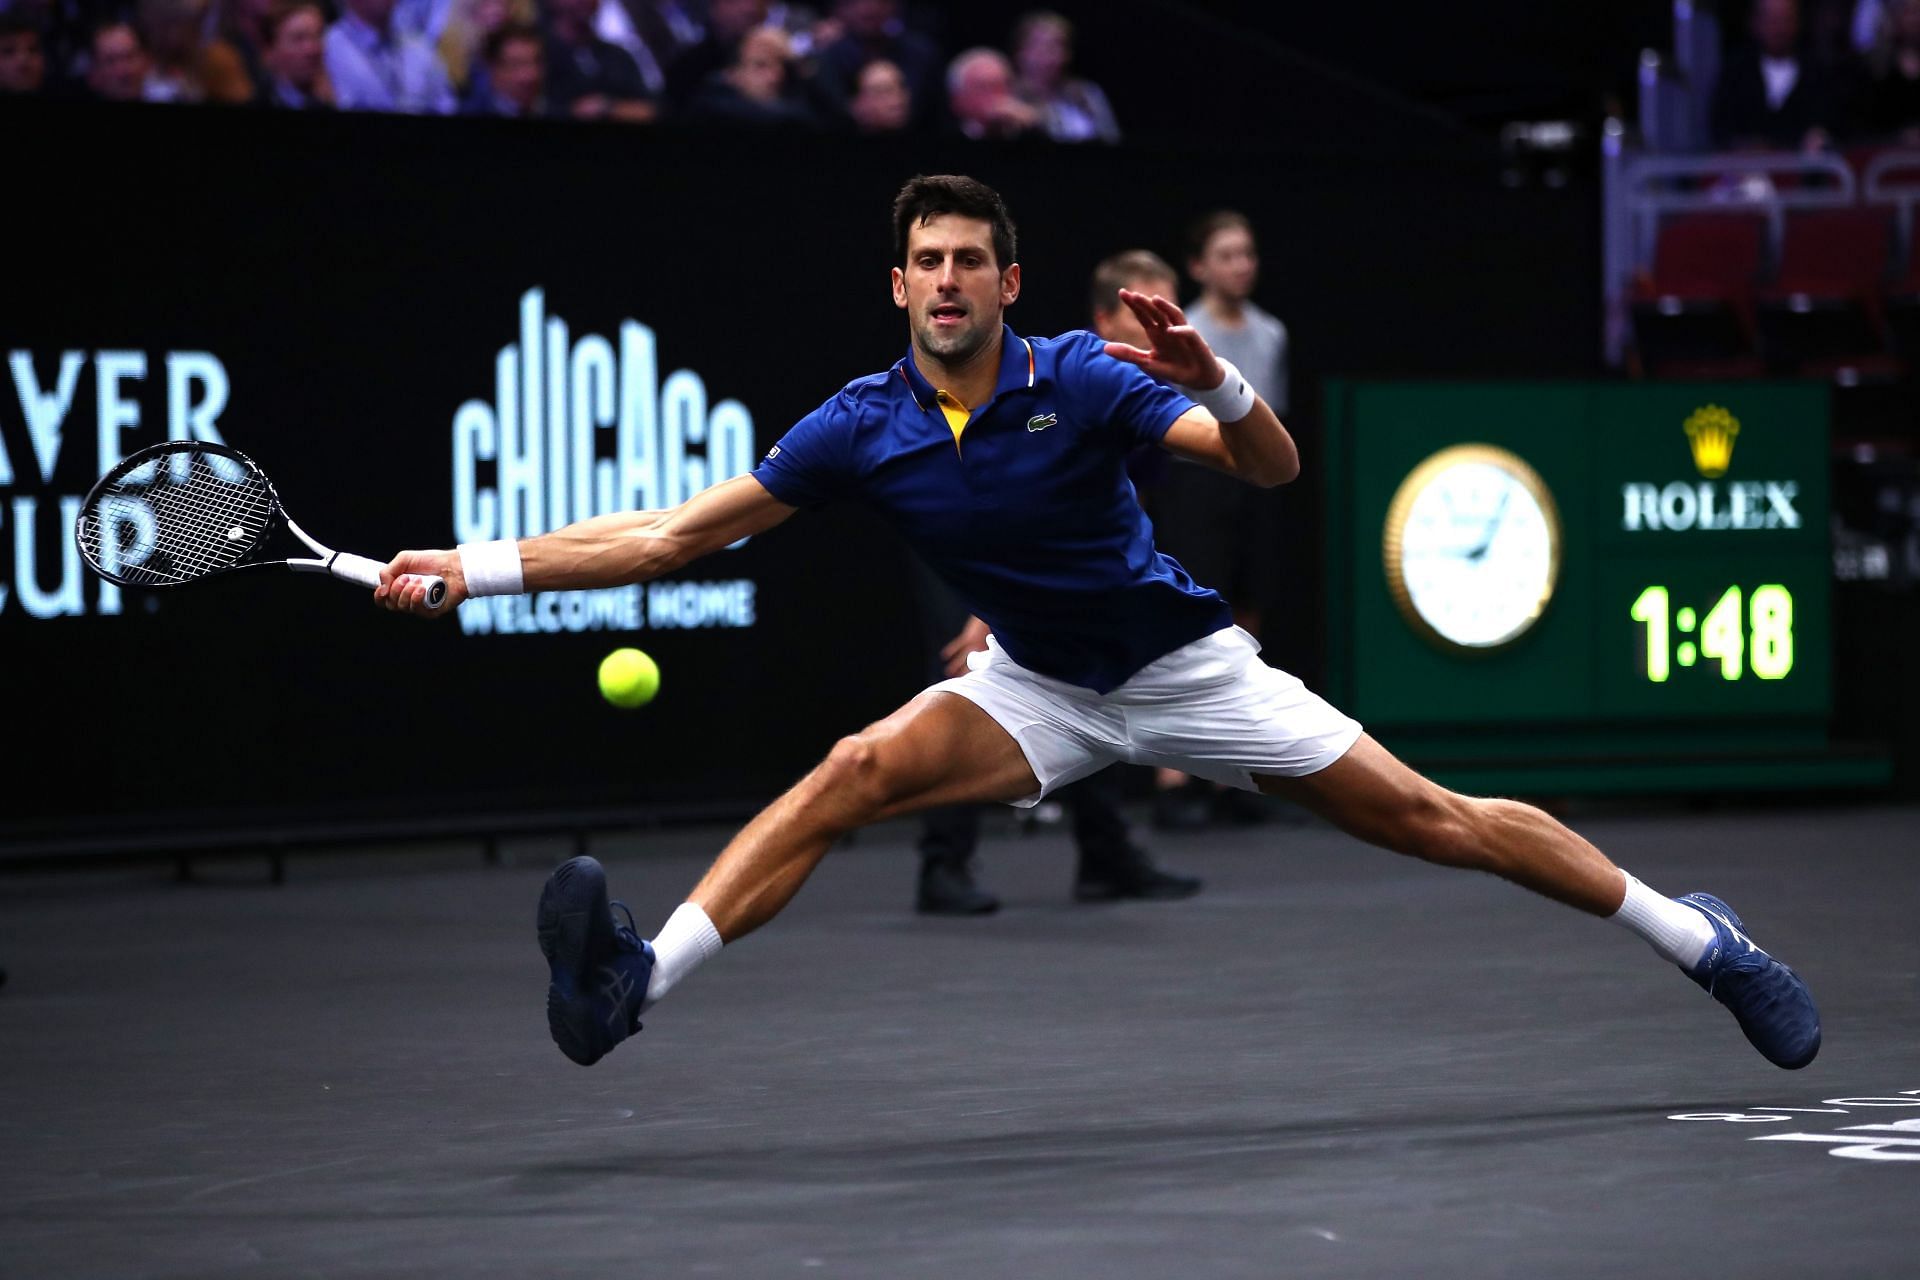 Novak Djokovic previously played at the 2018 Laver Cup